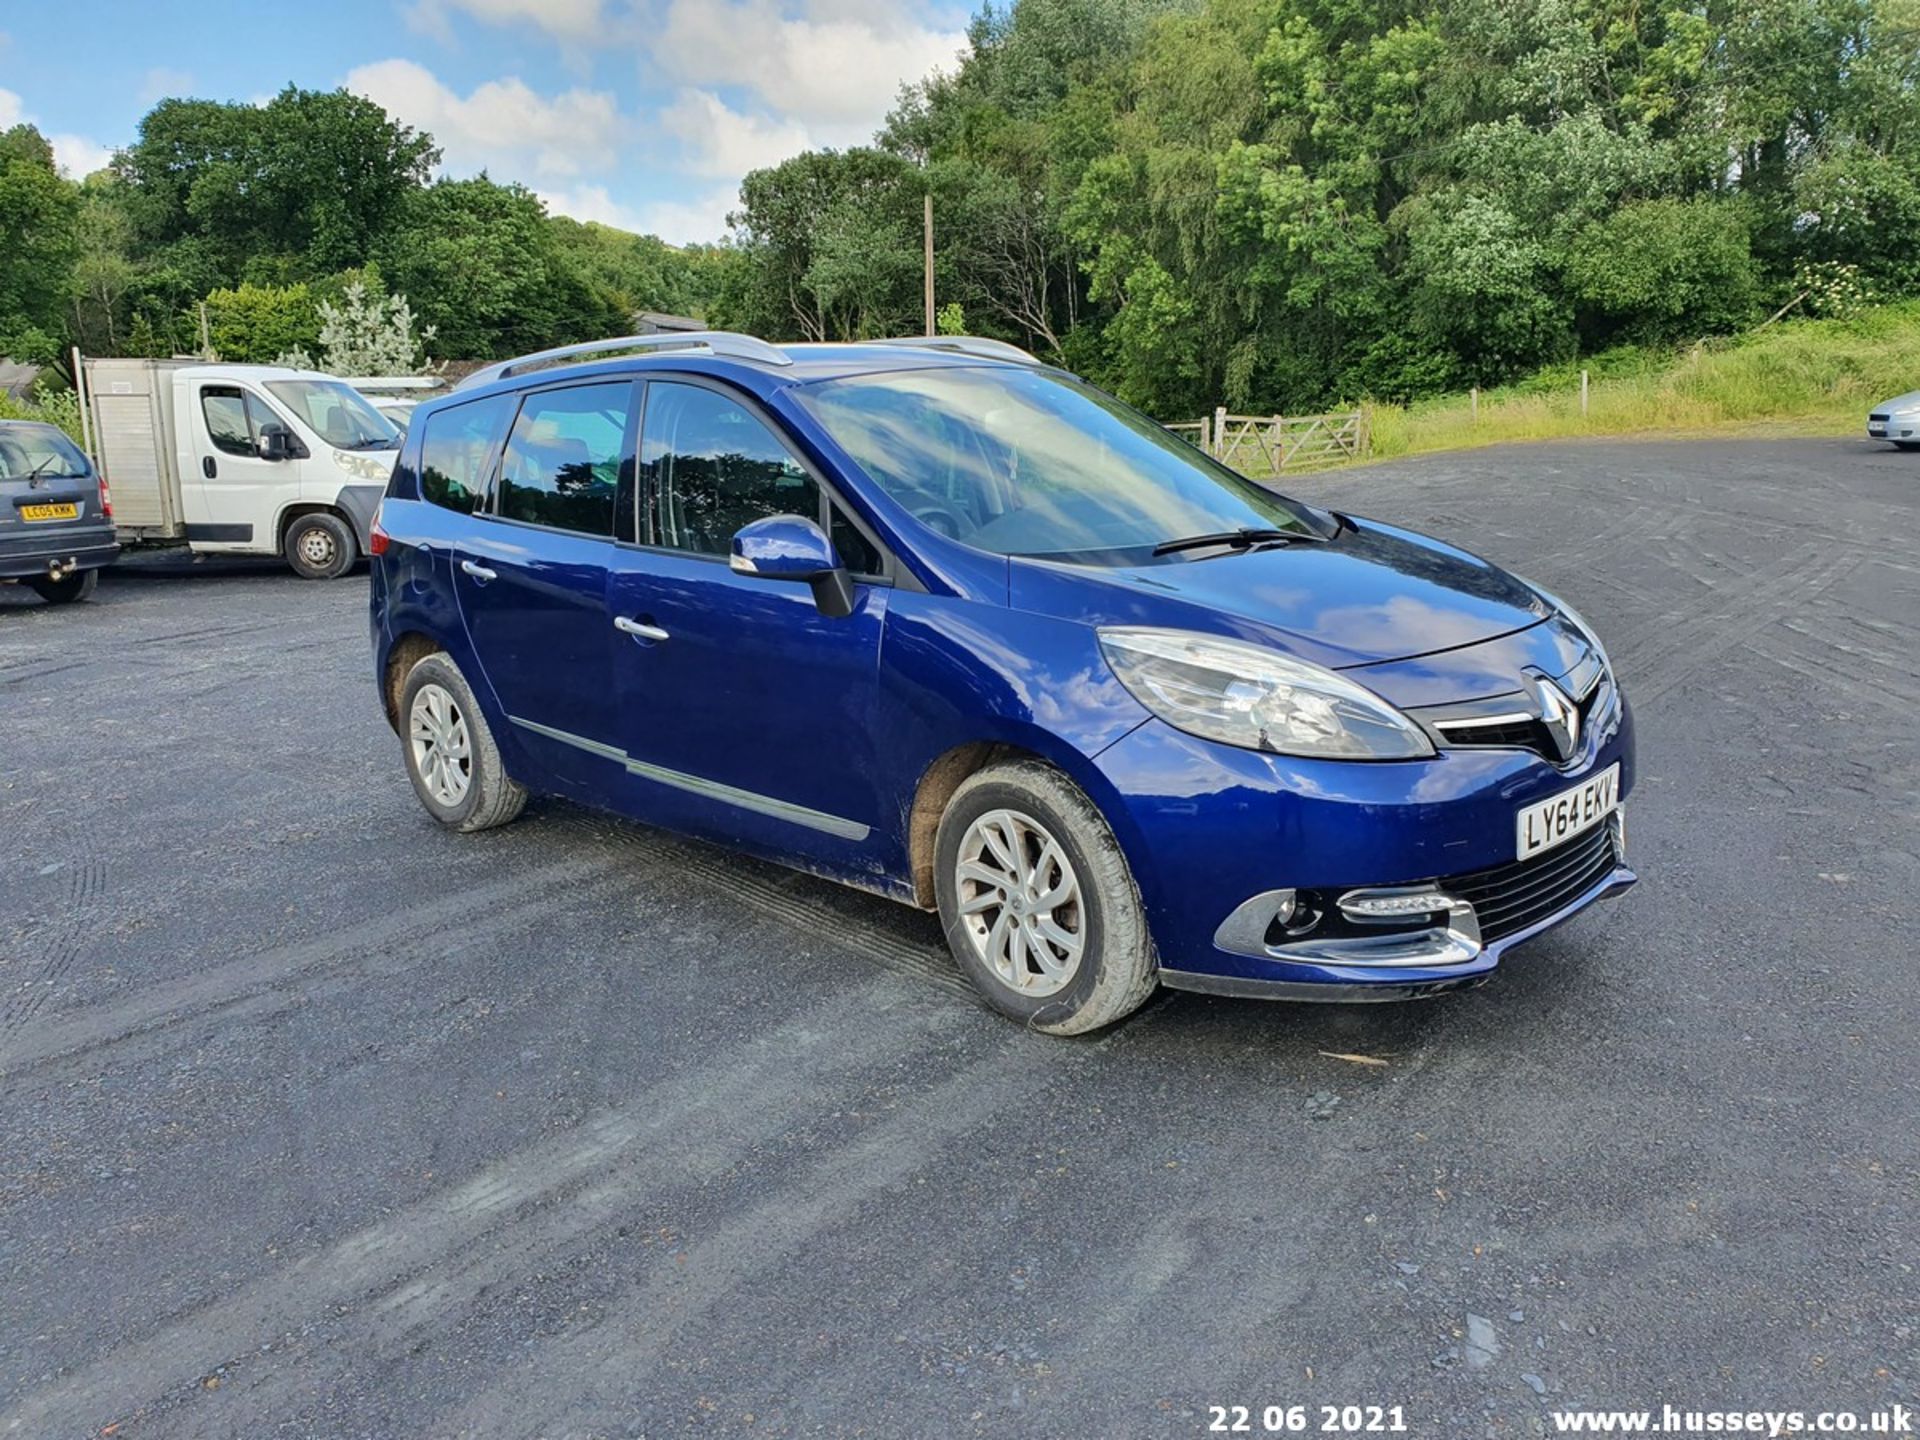 14/64 RENAULT GRAND SCENIC DY-QUE T-T D - 1461cc 5dr MPV (Blue, 152k) - Image 15 of 23